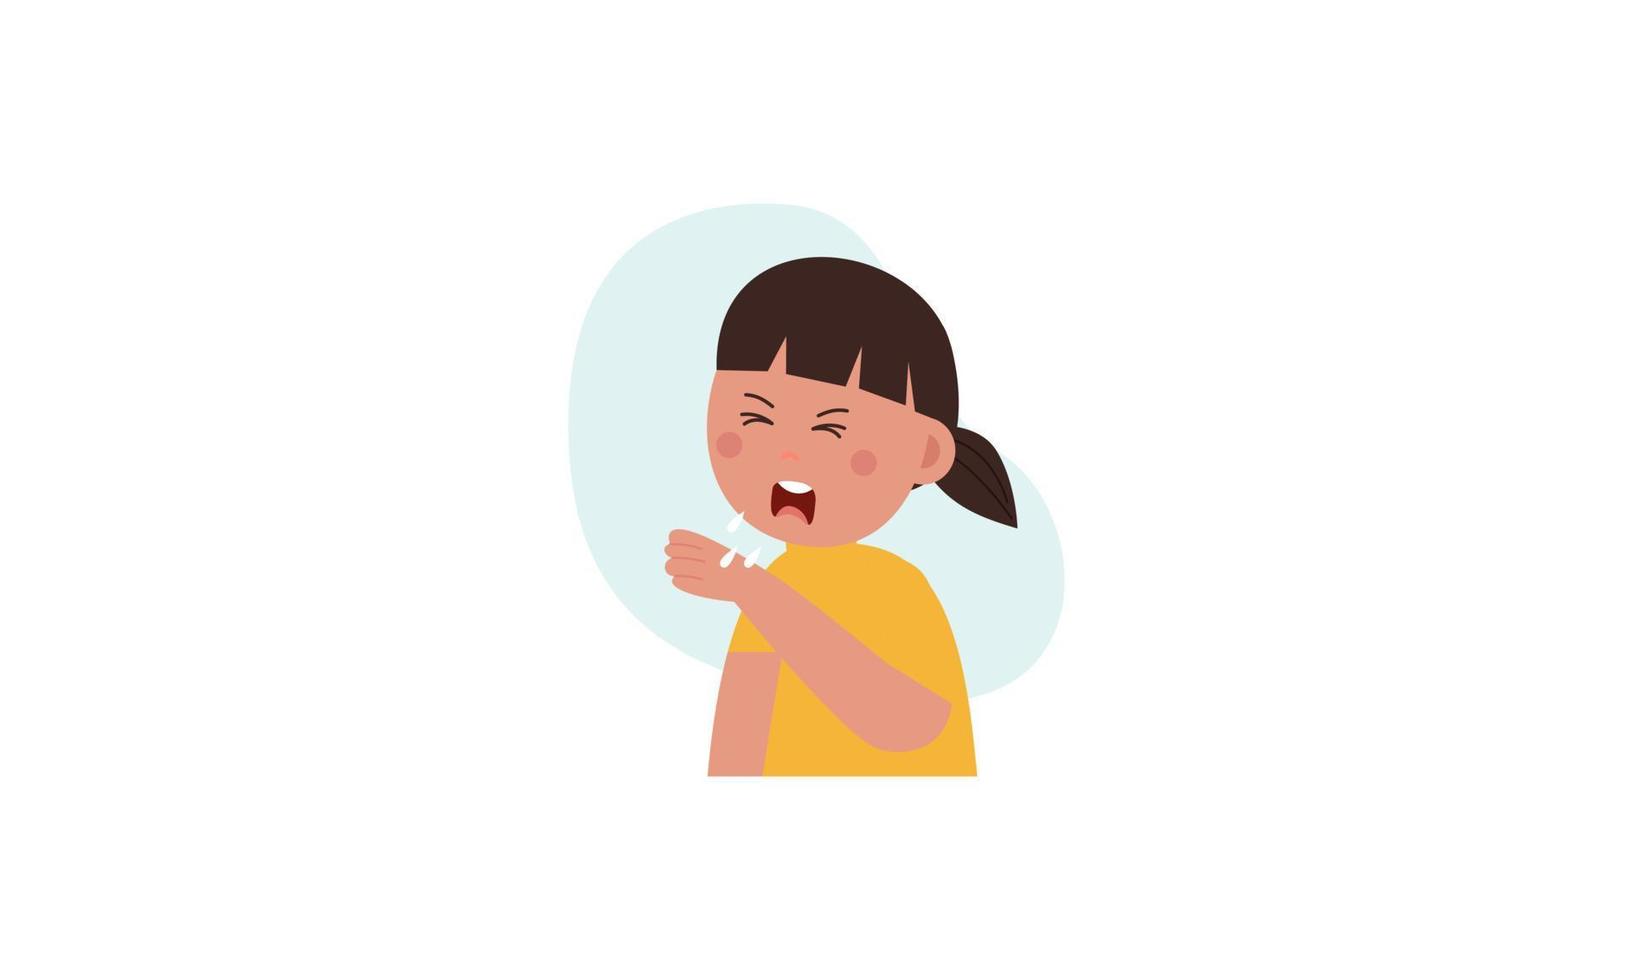 Kid character sneezing and coughing illustration vector